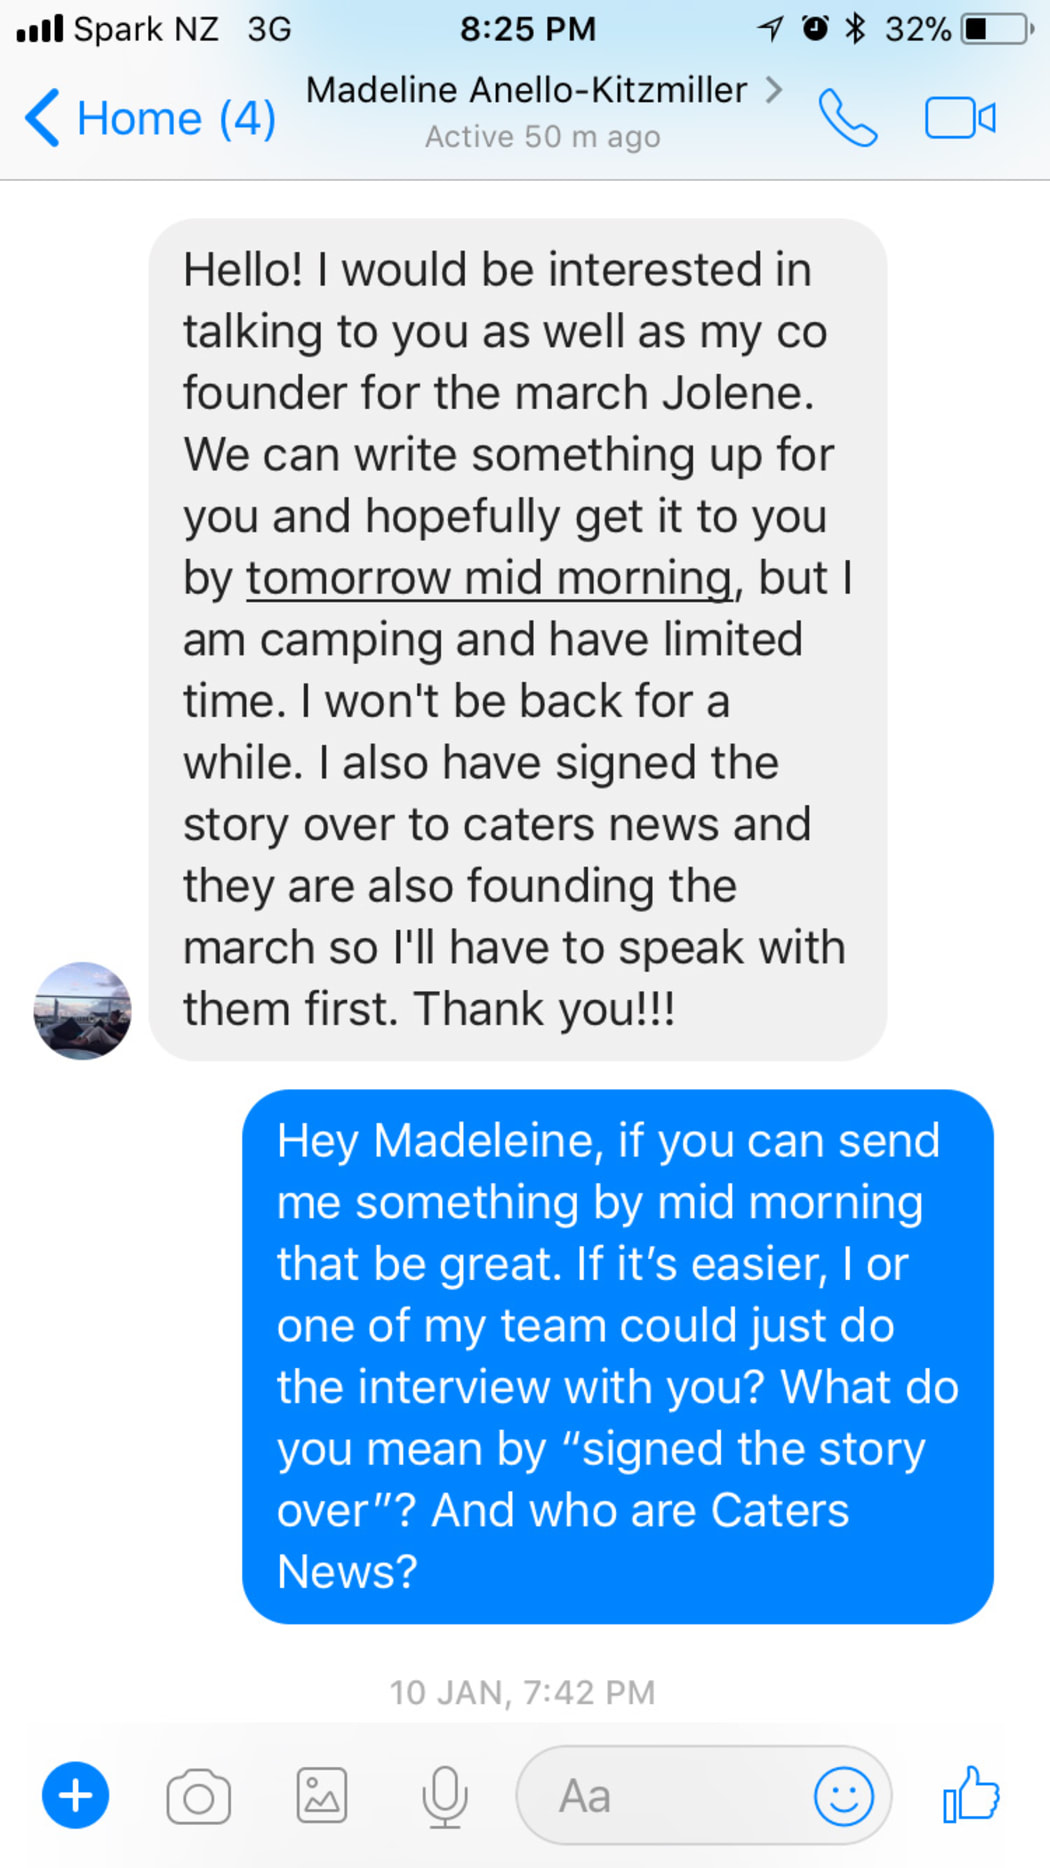 A screenshot of the conversation between Madeline Anello-Kitzmiller and Wireless Editor Marcus Stickley on Facebook Messenger.